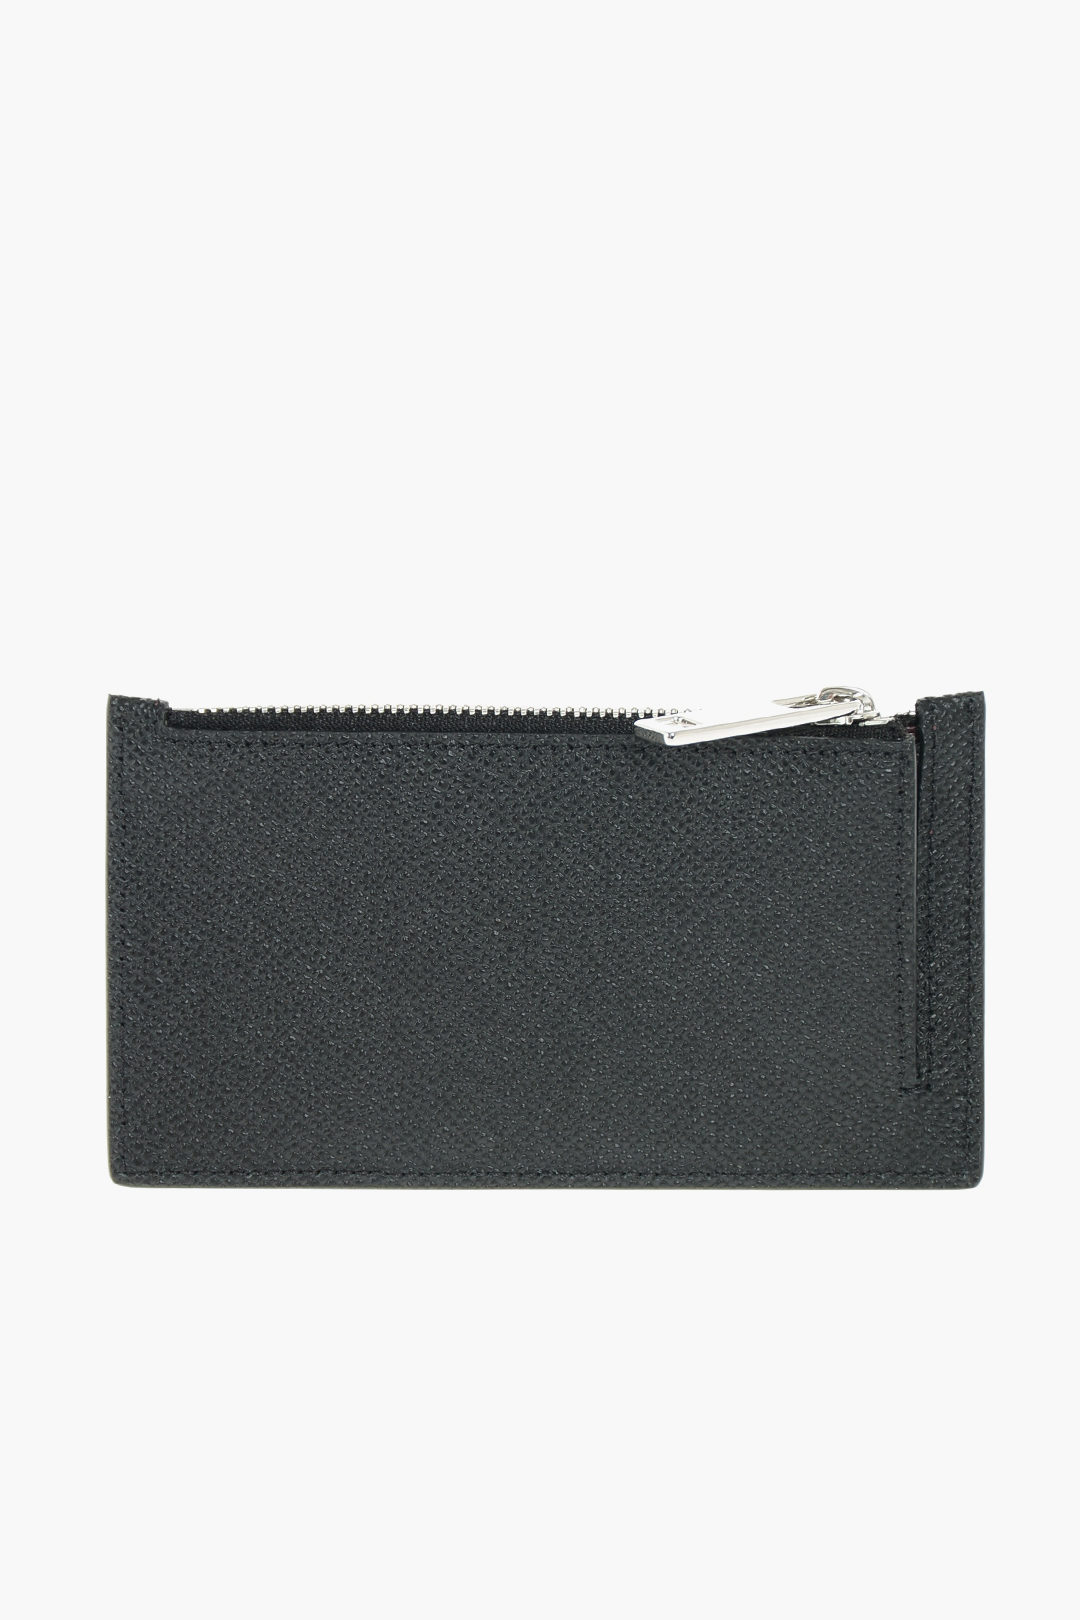 Givenchy textured leather card holder with zip closure men - Glamood Outlet